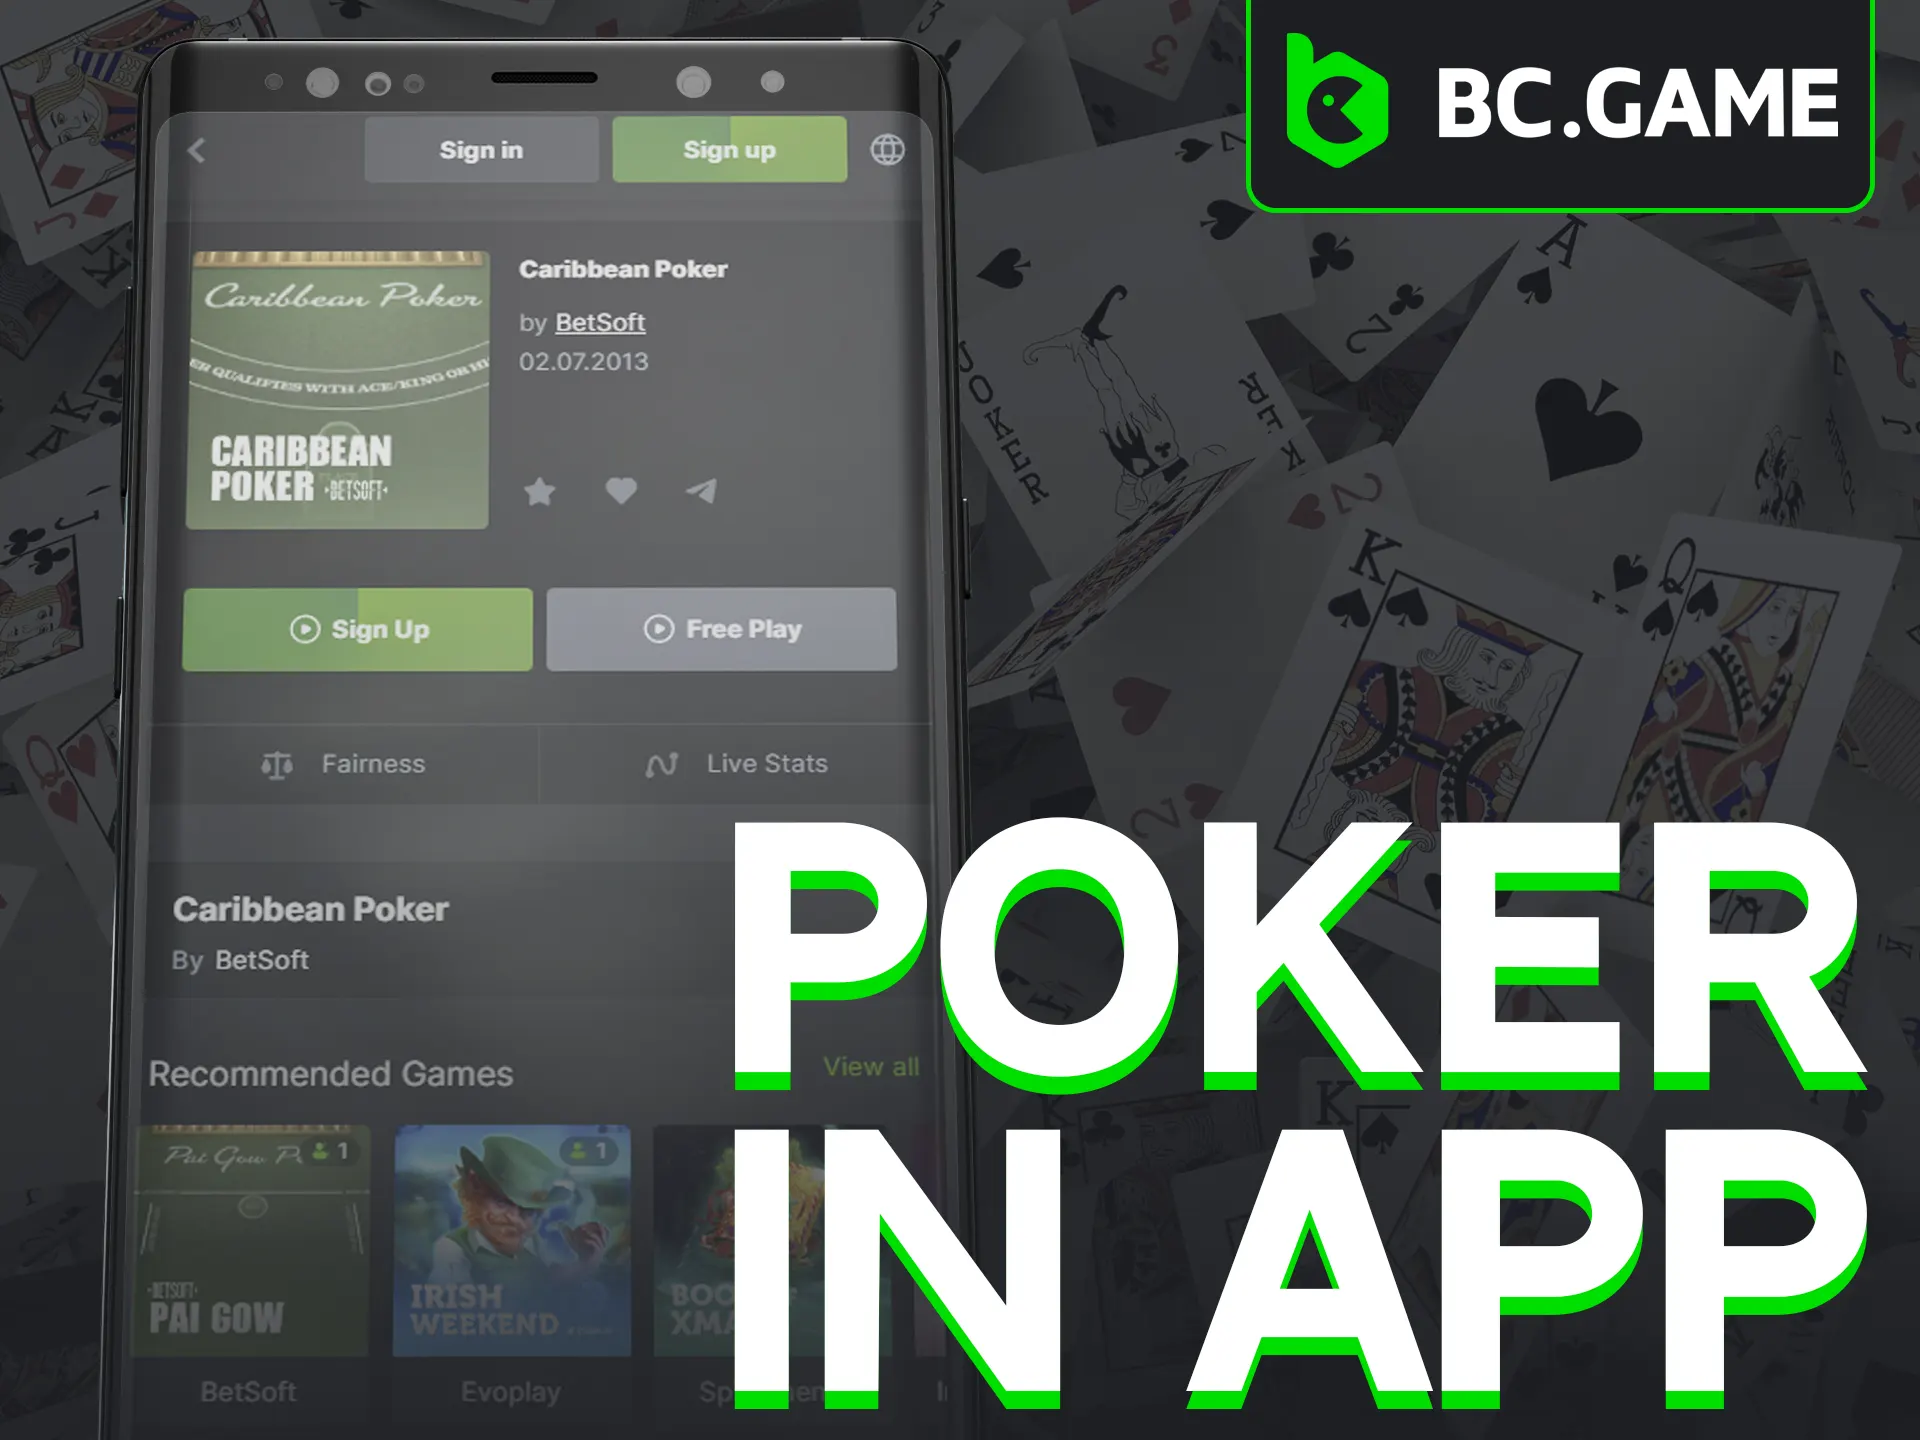 Play poker conveniently on BC Game's mobile app.